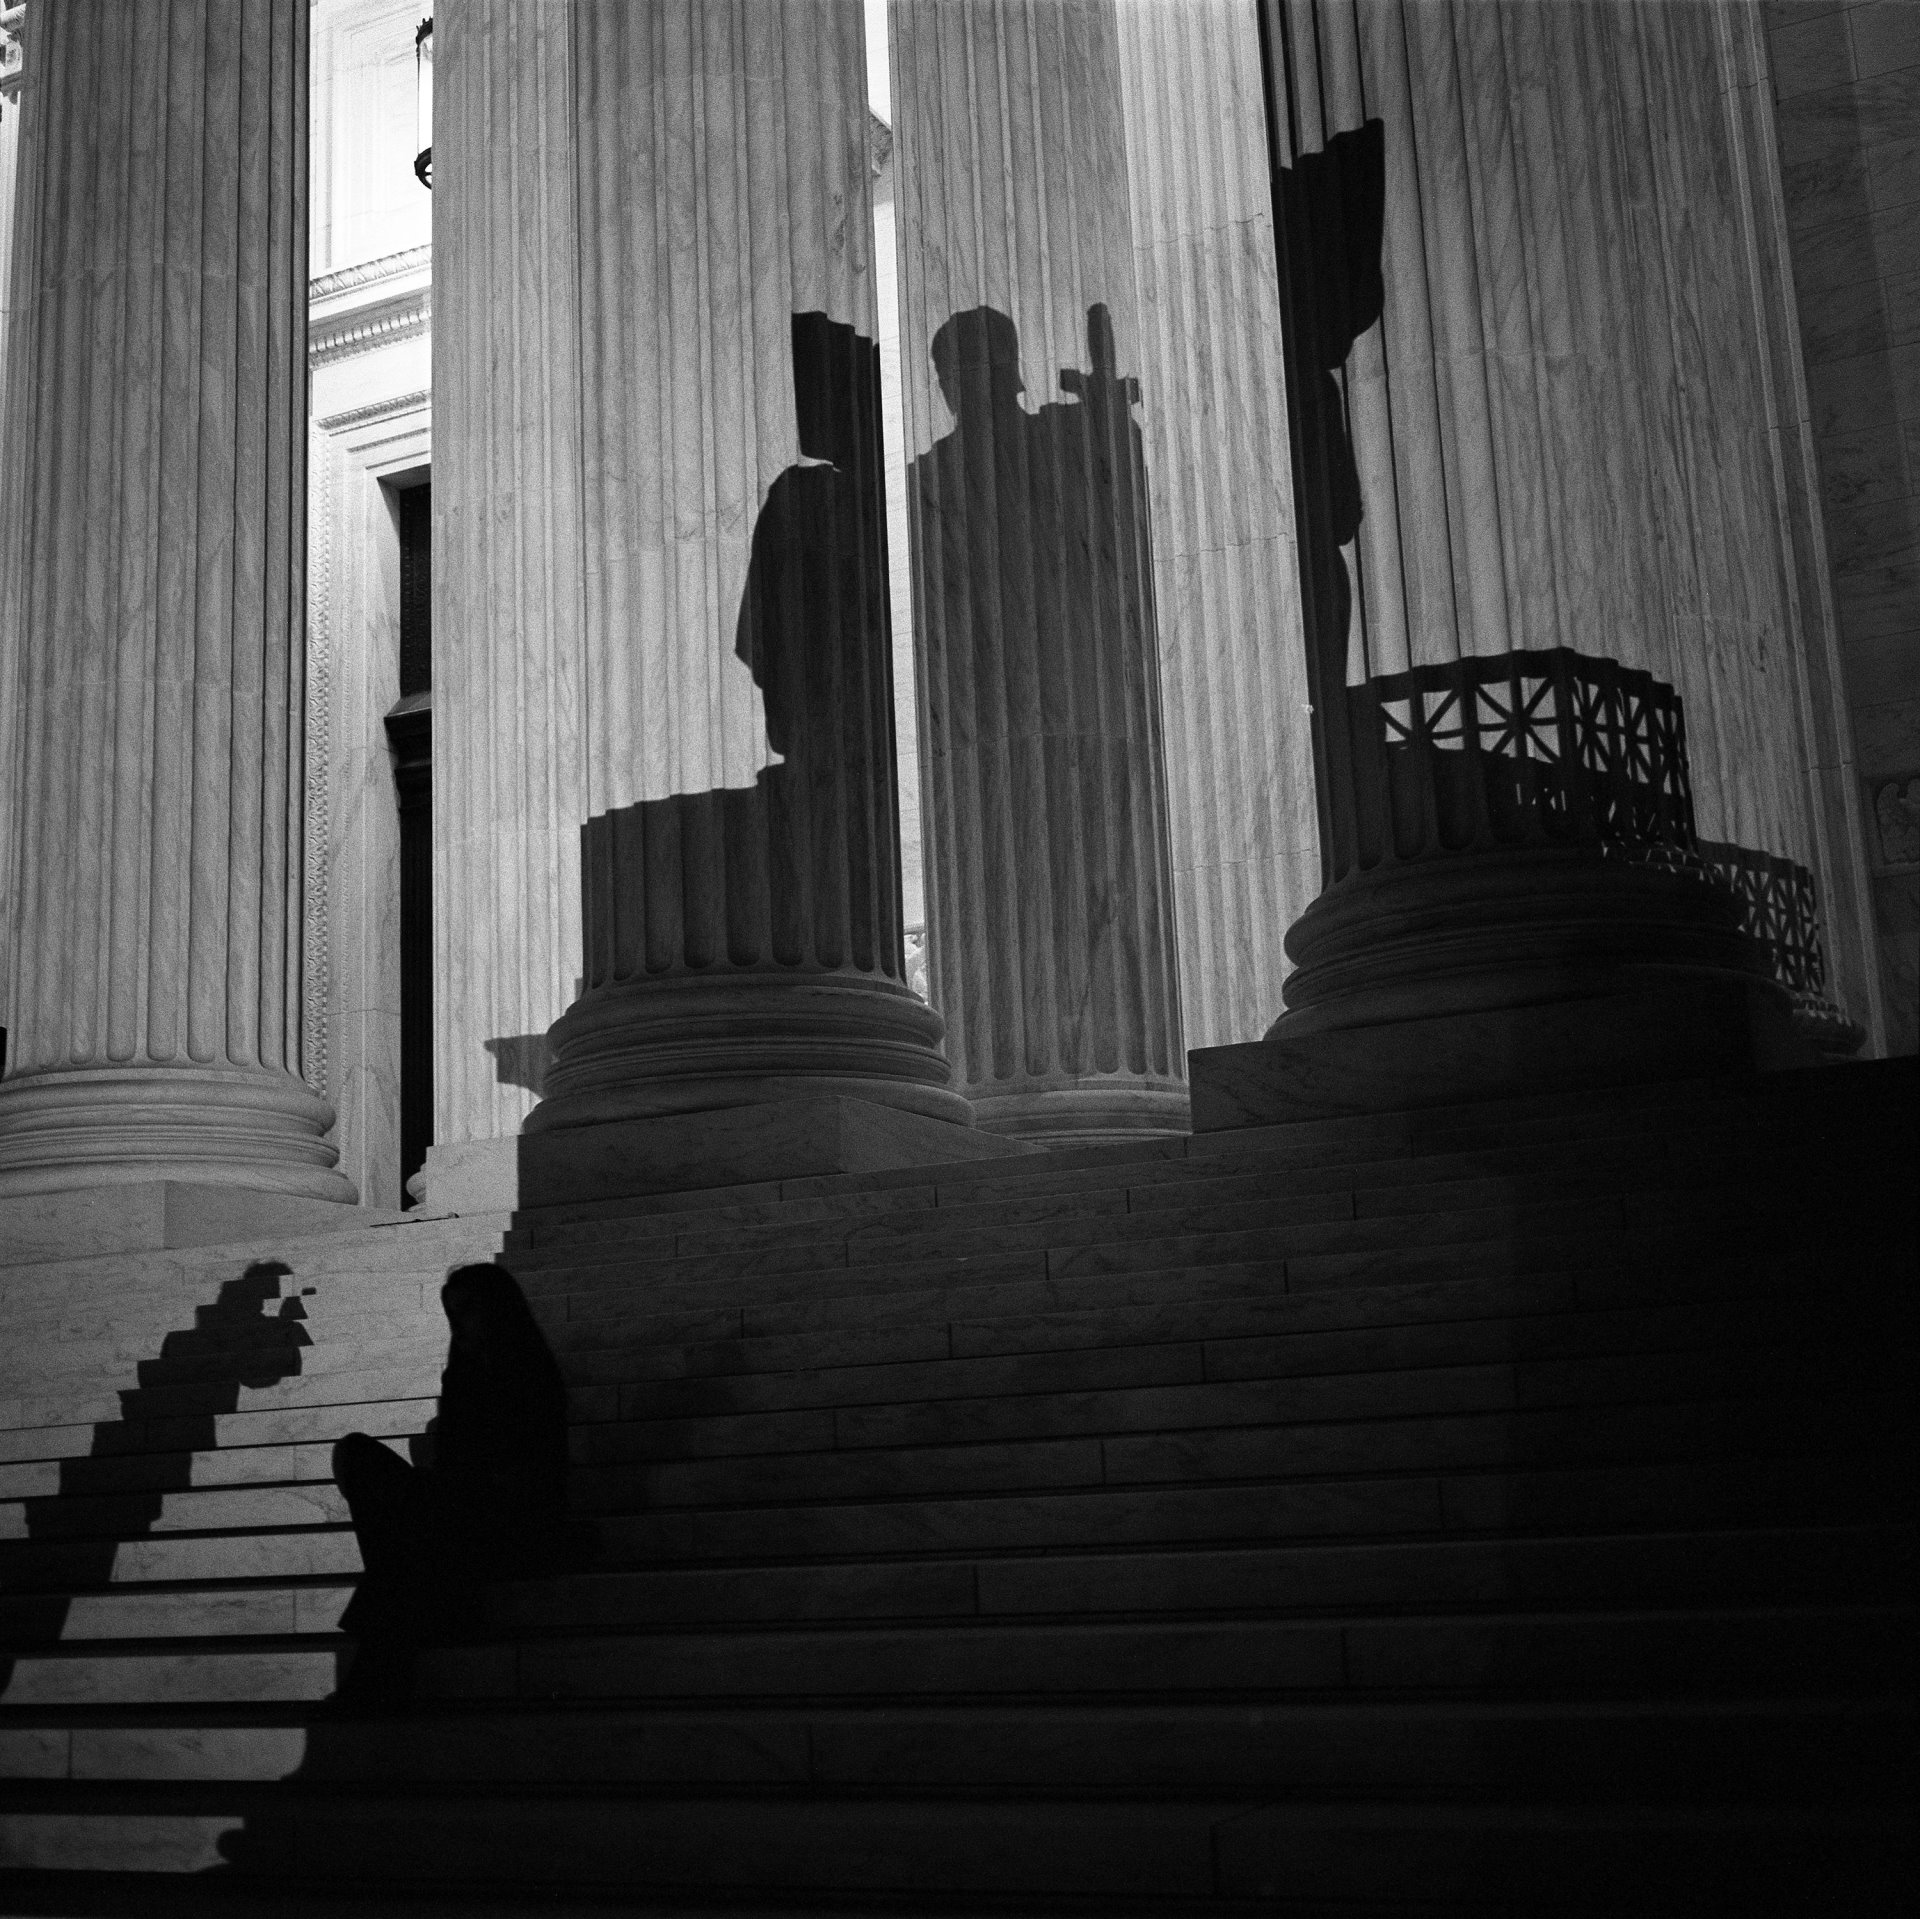 A shadow from the statue known as the Authority of Law is cast by a light used by a television crew onto a woman sitting on the steps of the US Supreme Court, on the night that Supreme Court Justice Ruth Bader Ginsburg died, Washington DC, USA.